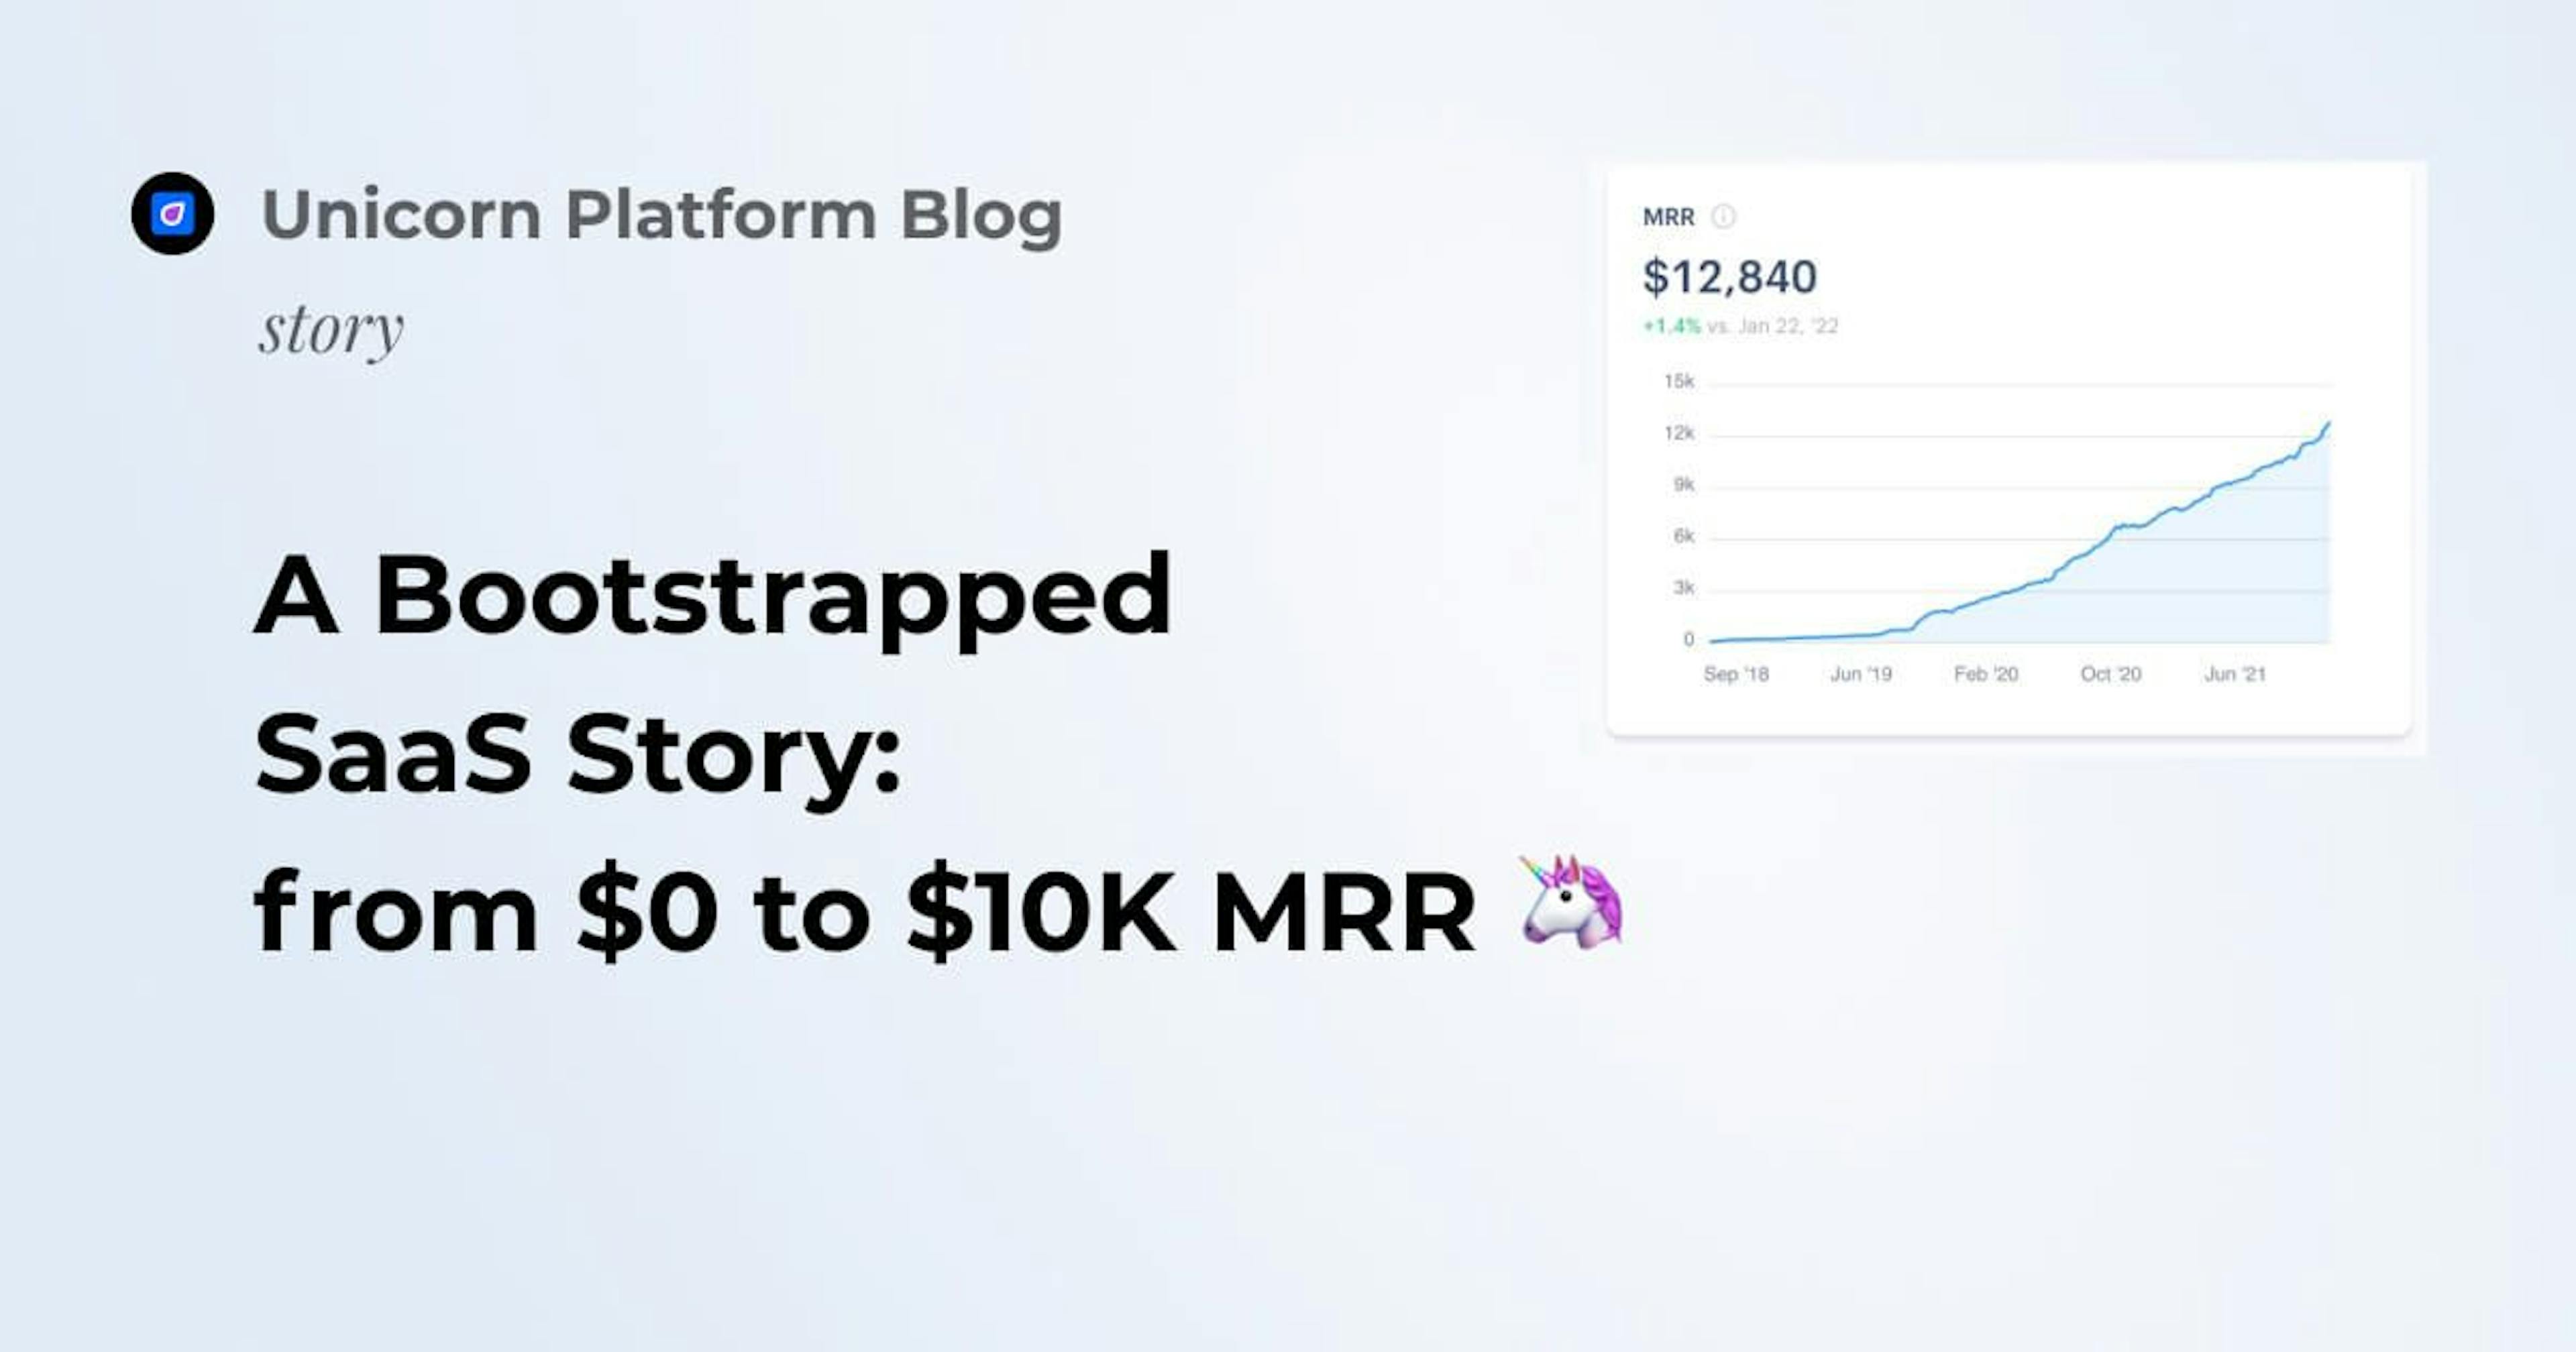 /a-bootstrapped-saas-story-from-$0-to-$10k-mrr feature image